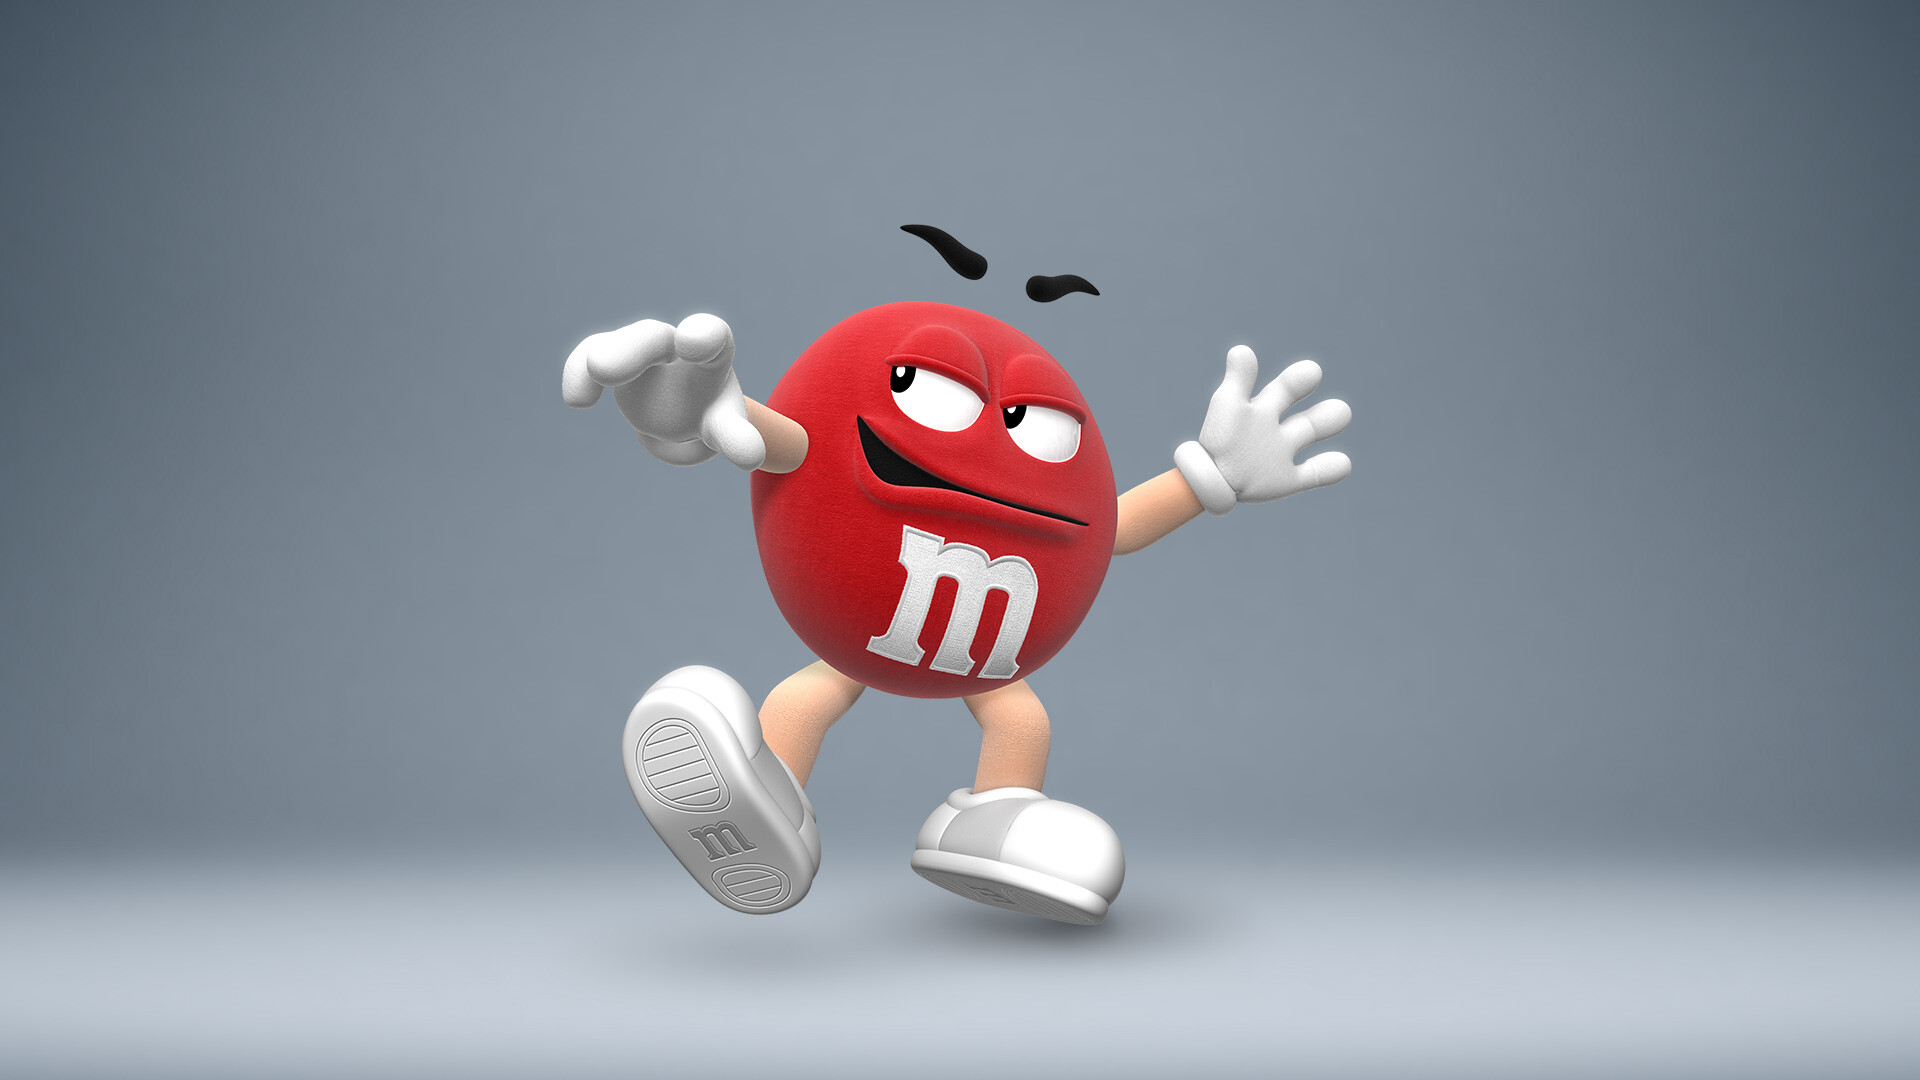 ArtStation - Red m&m character